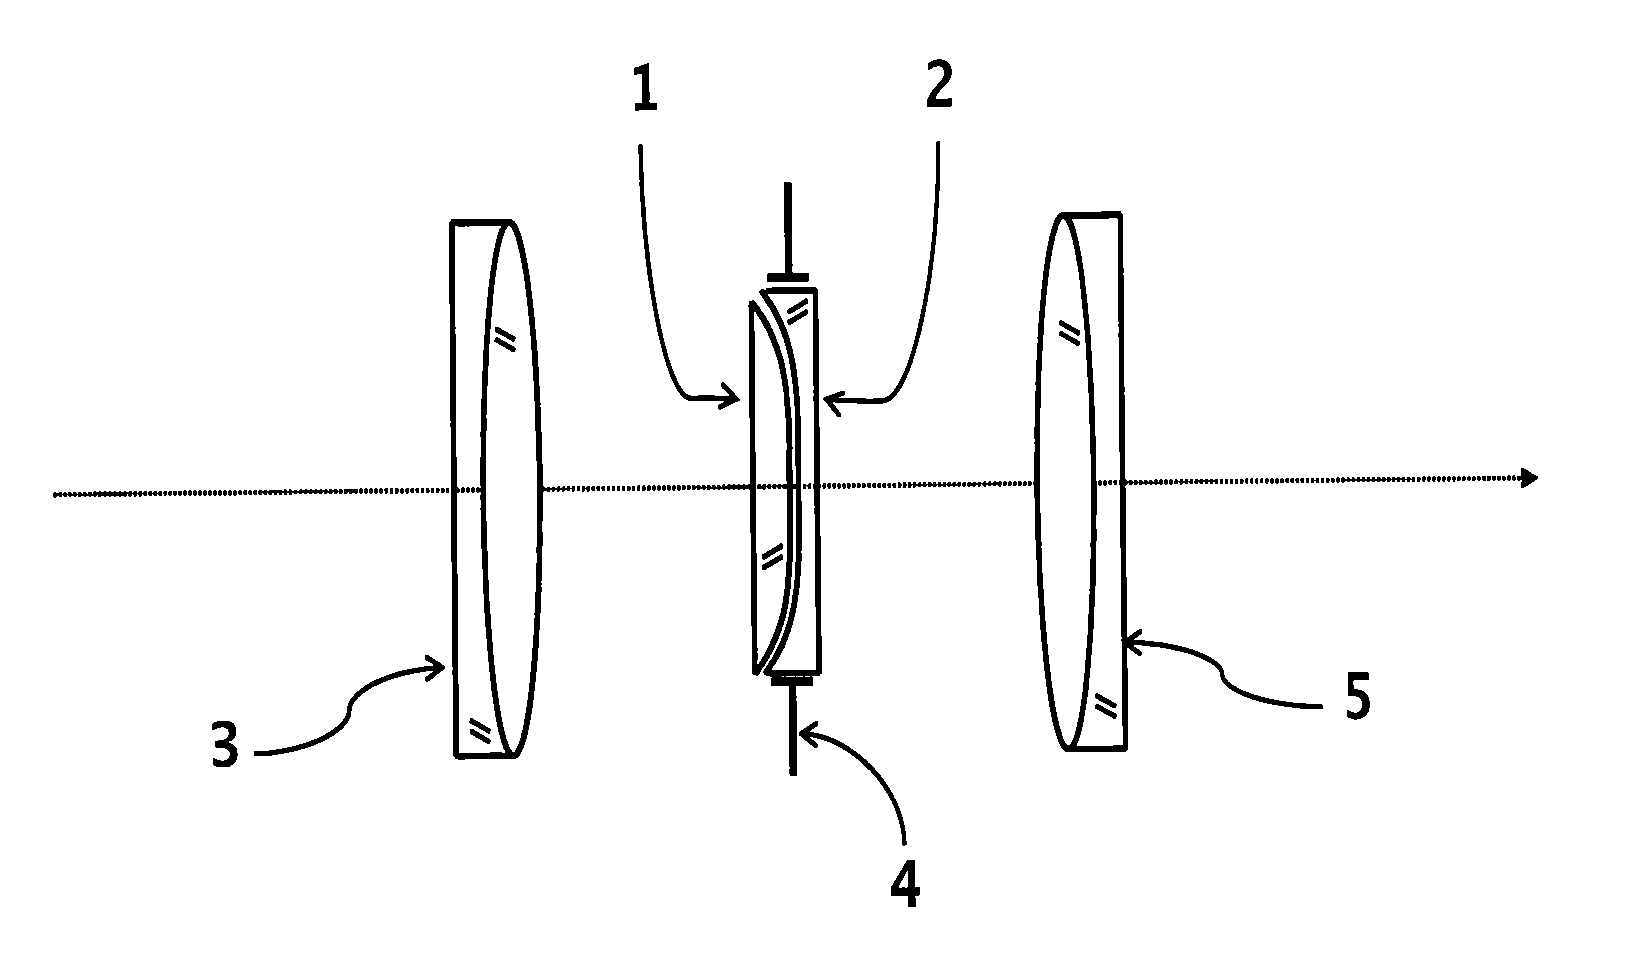 Optical system with variable field depth